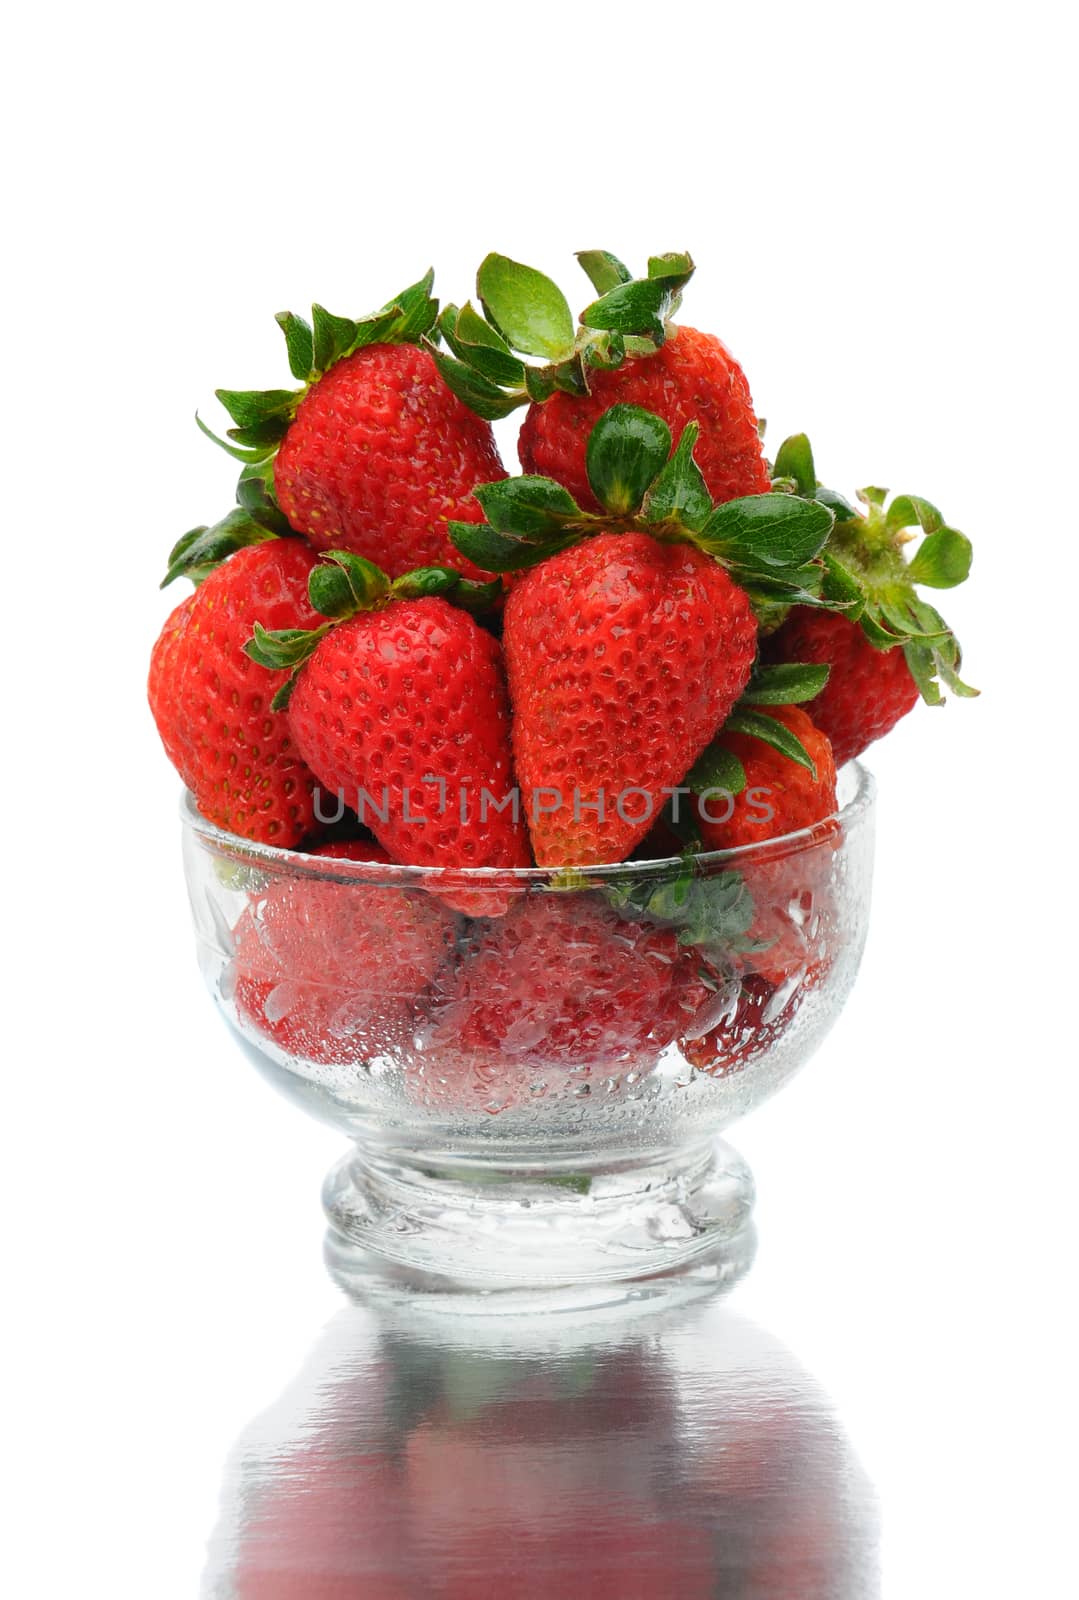 Strawberries in Glass Bowl by sCukrov